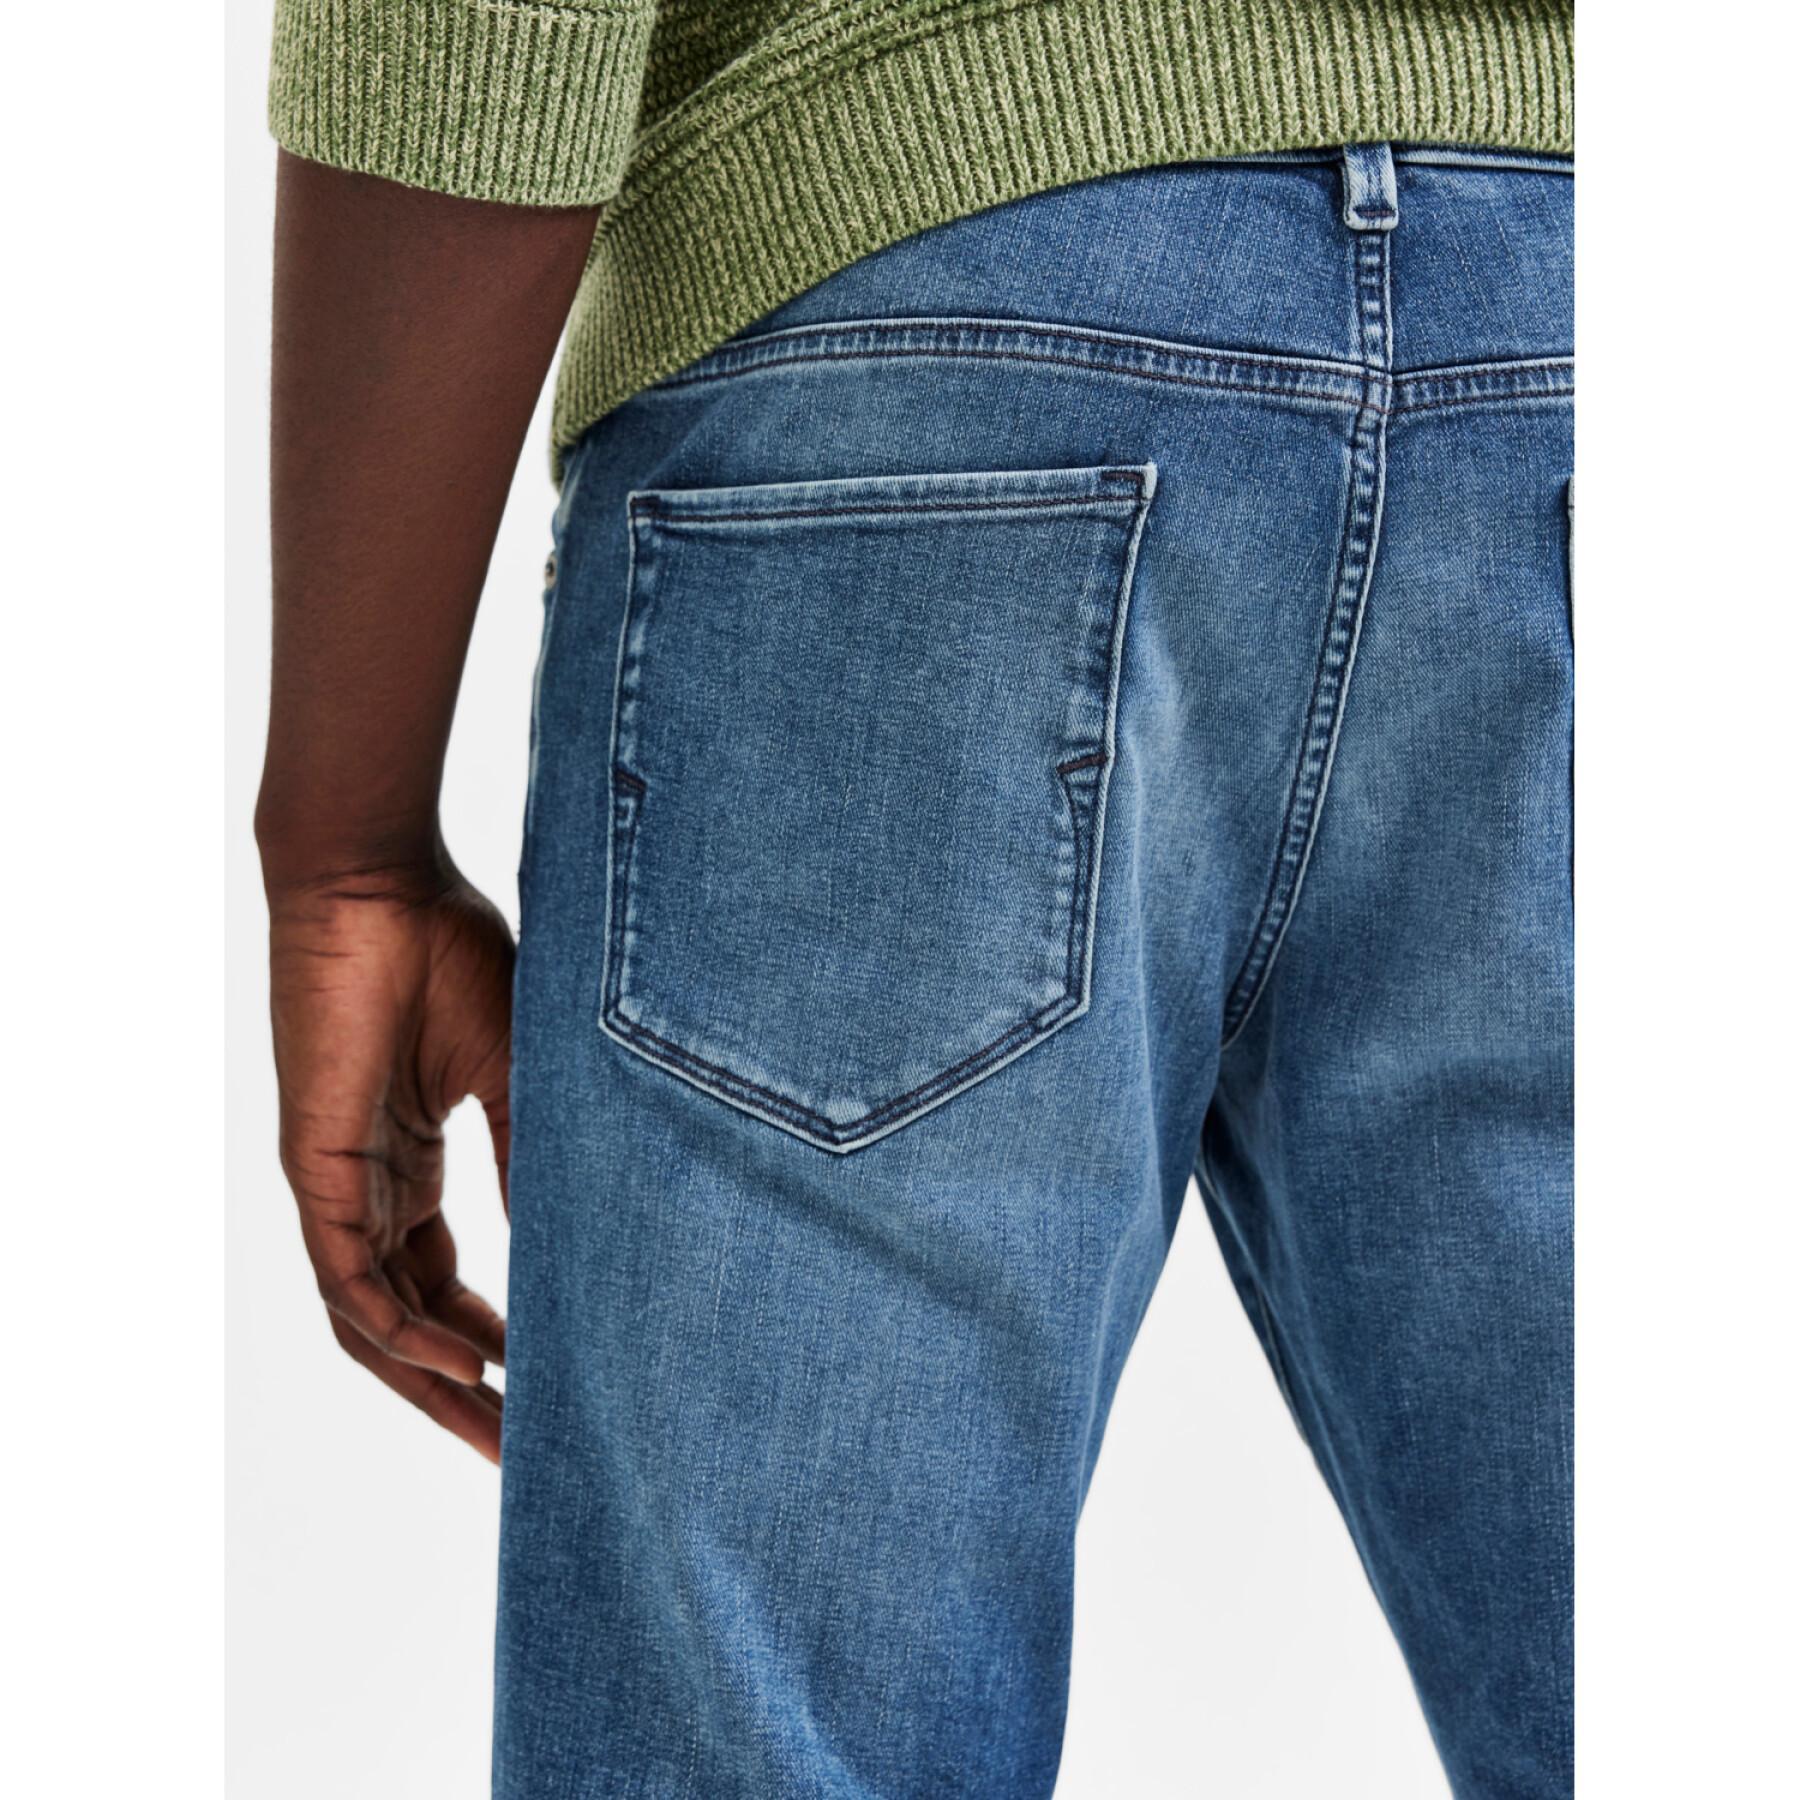 Jeans rights Selected 196 Scott 31601